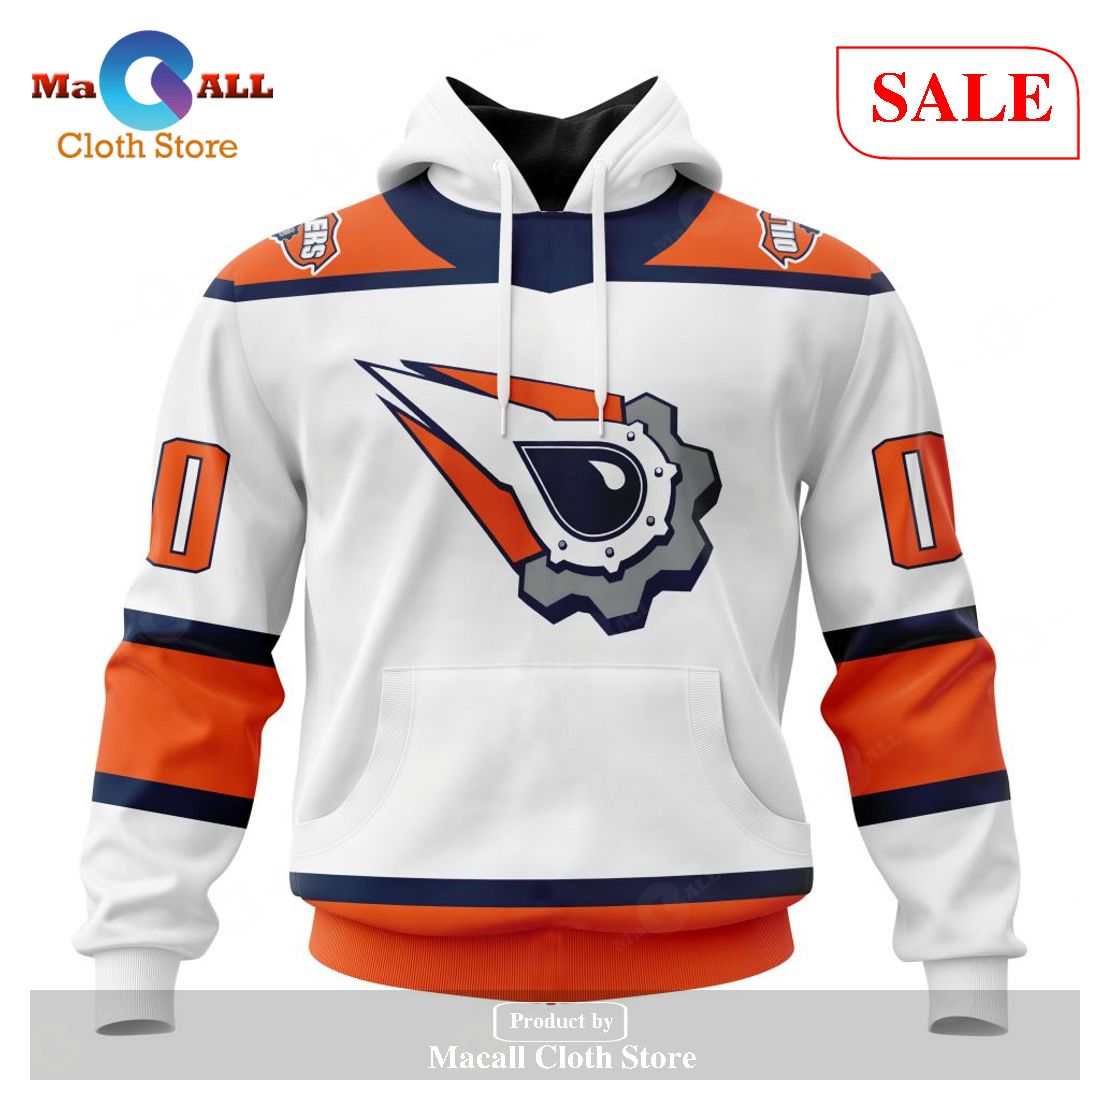 Edmonton Oilers Specialized 2022 Concepts Personalized Hockey Jersey -  LIMITED EDITION